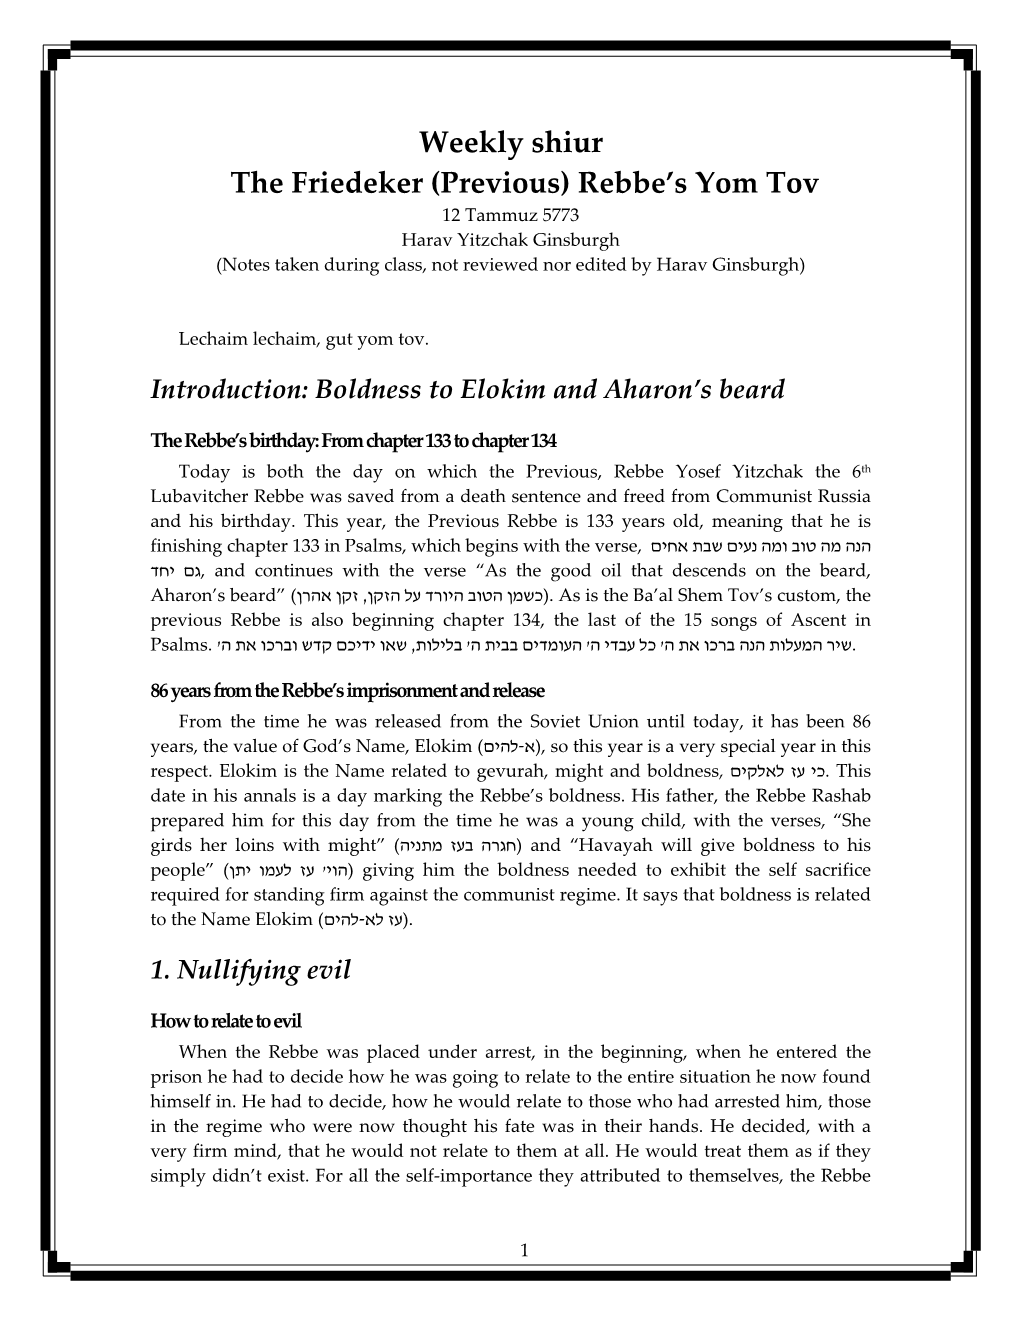 Weekly Shiur the Friedeker (Previous) Rebbe's Yom